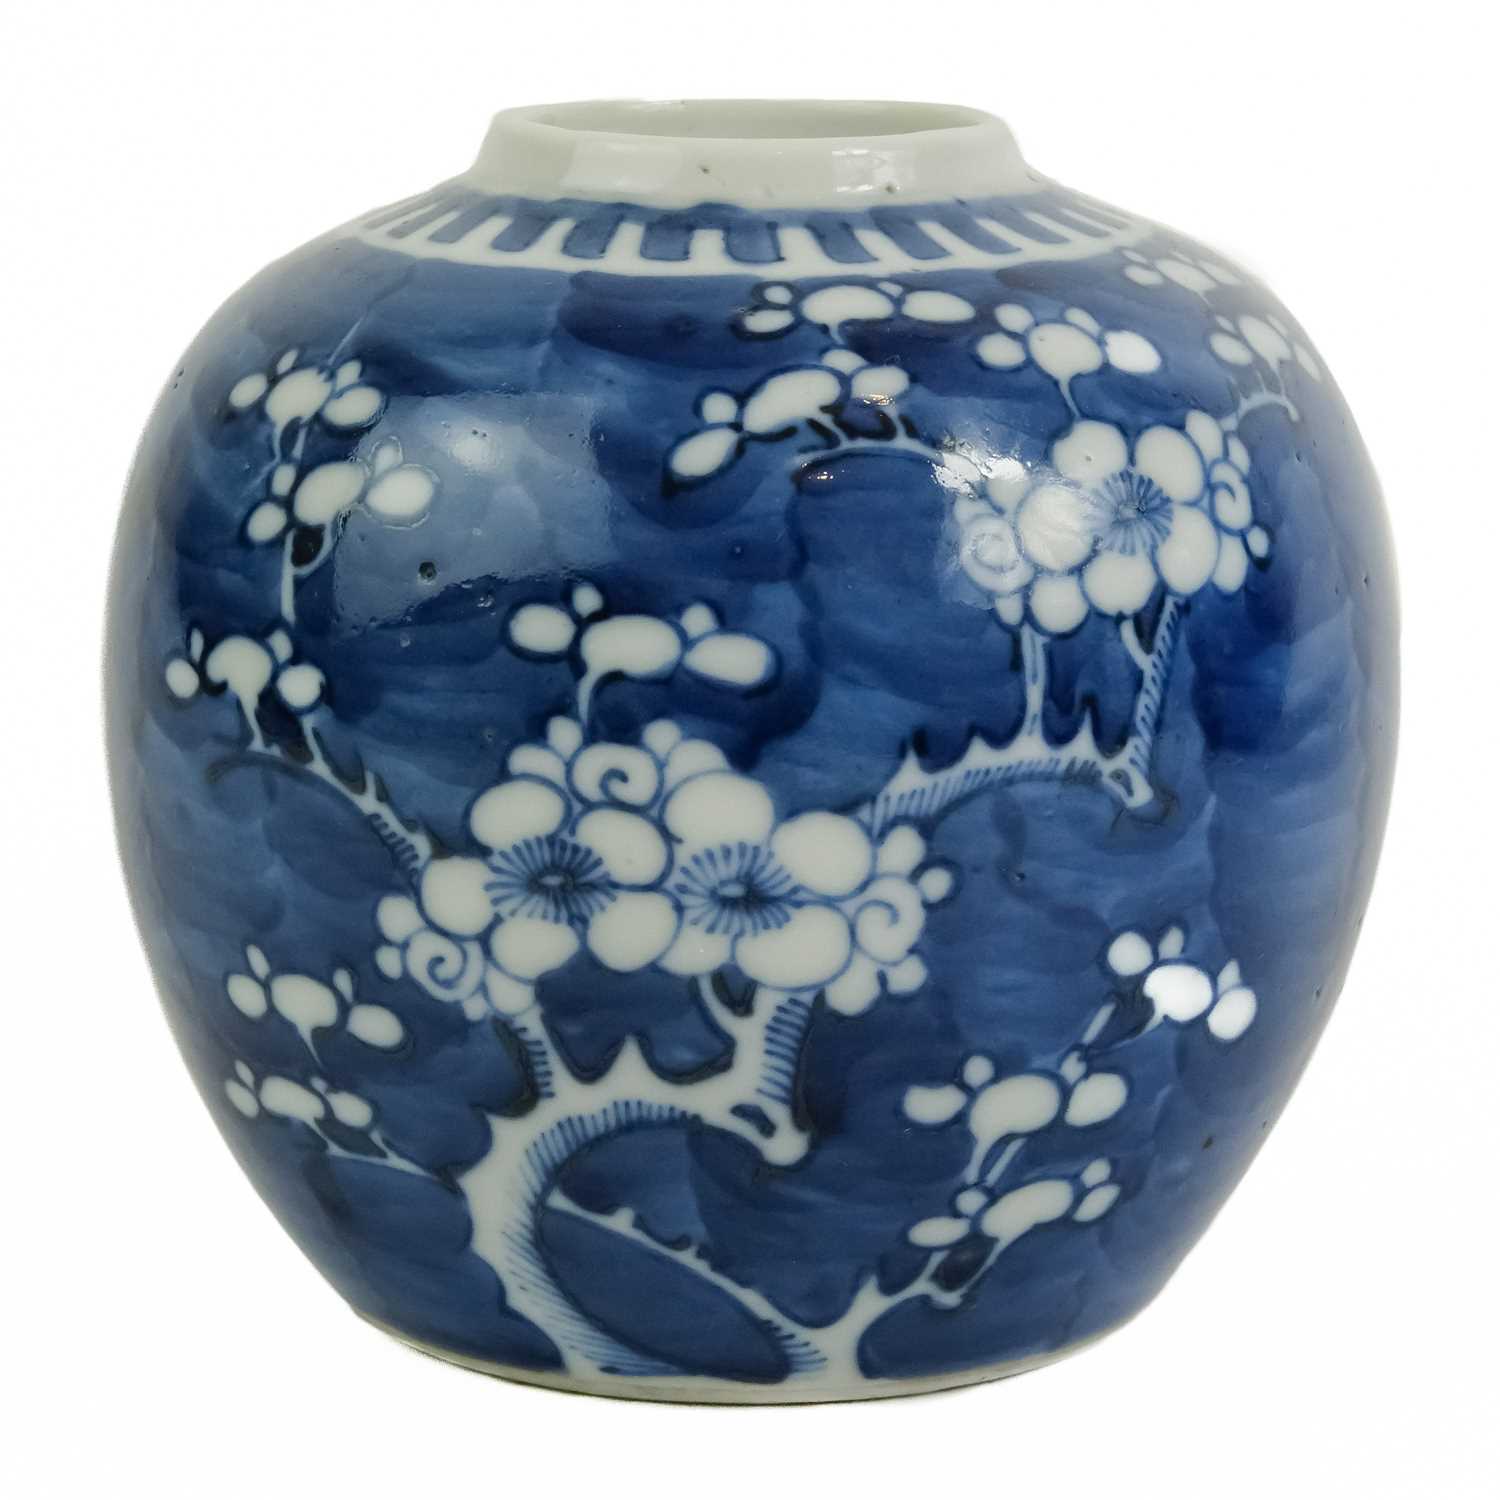 Two Chinese blue and white prunus blossom pattern ginger jars, late 19th century. - Image 4 of 10